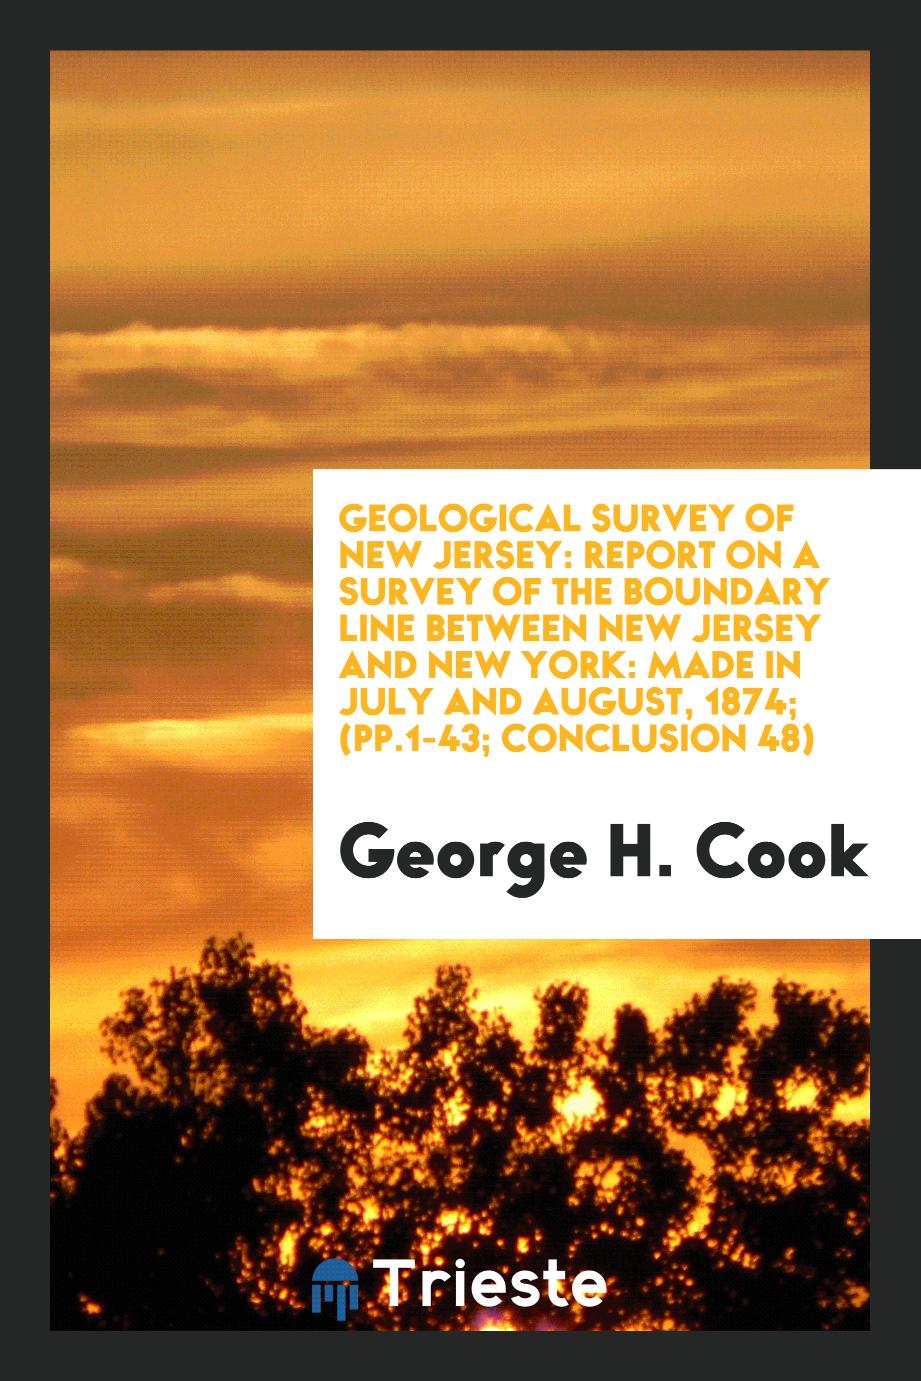 Geological Survey of New Jersey: Report on a Survey of the Boundary Line Between New Jersey and New York: Made in July and August, 1874; (pp.1-43; conclusion 48)